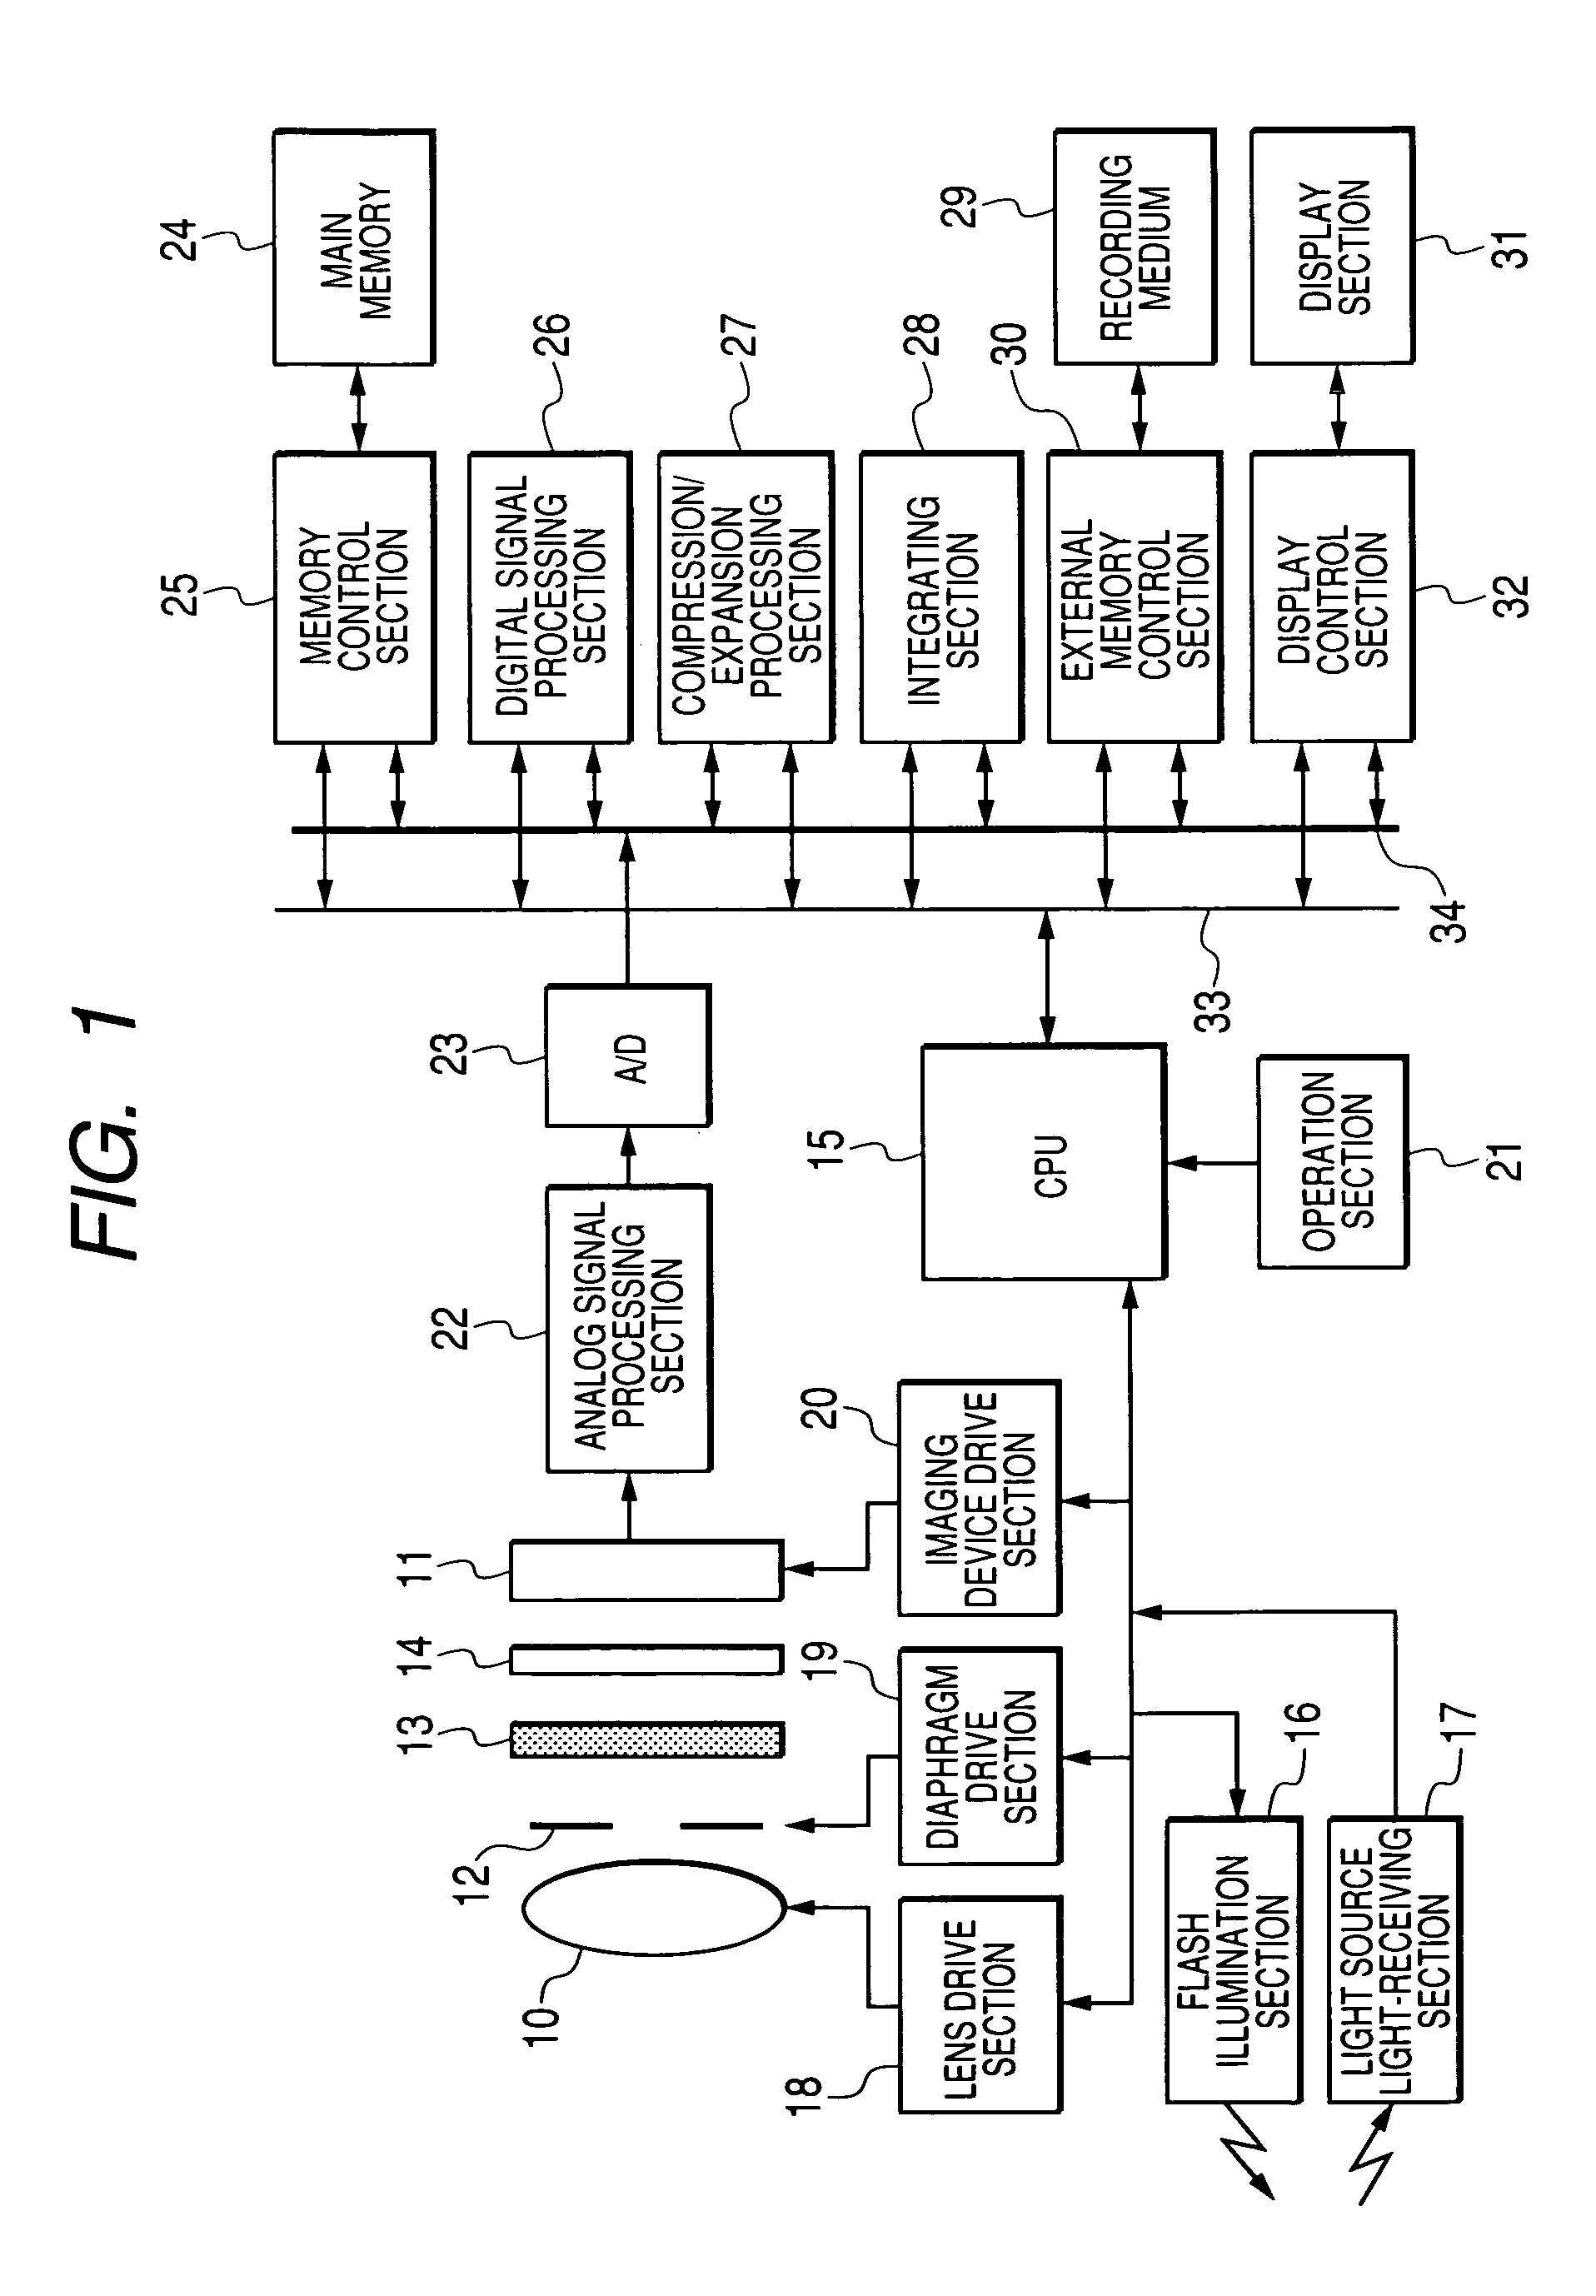 Solid-state imaging apparatus and digital camera for white balance correction